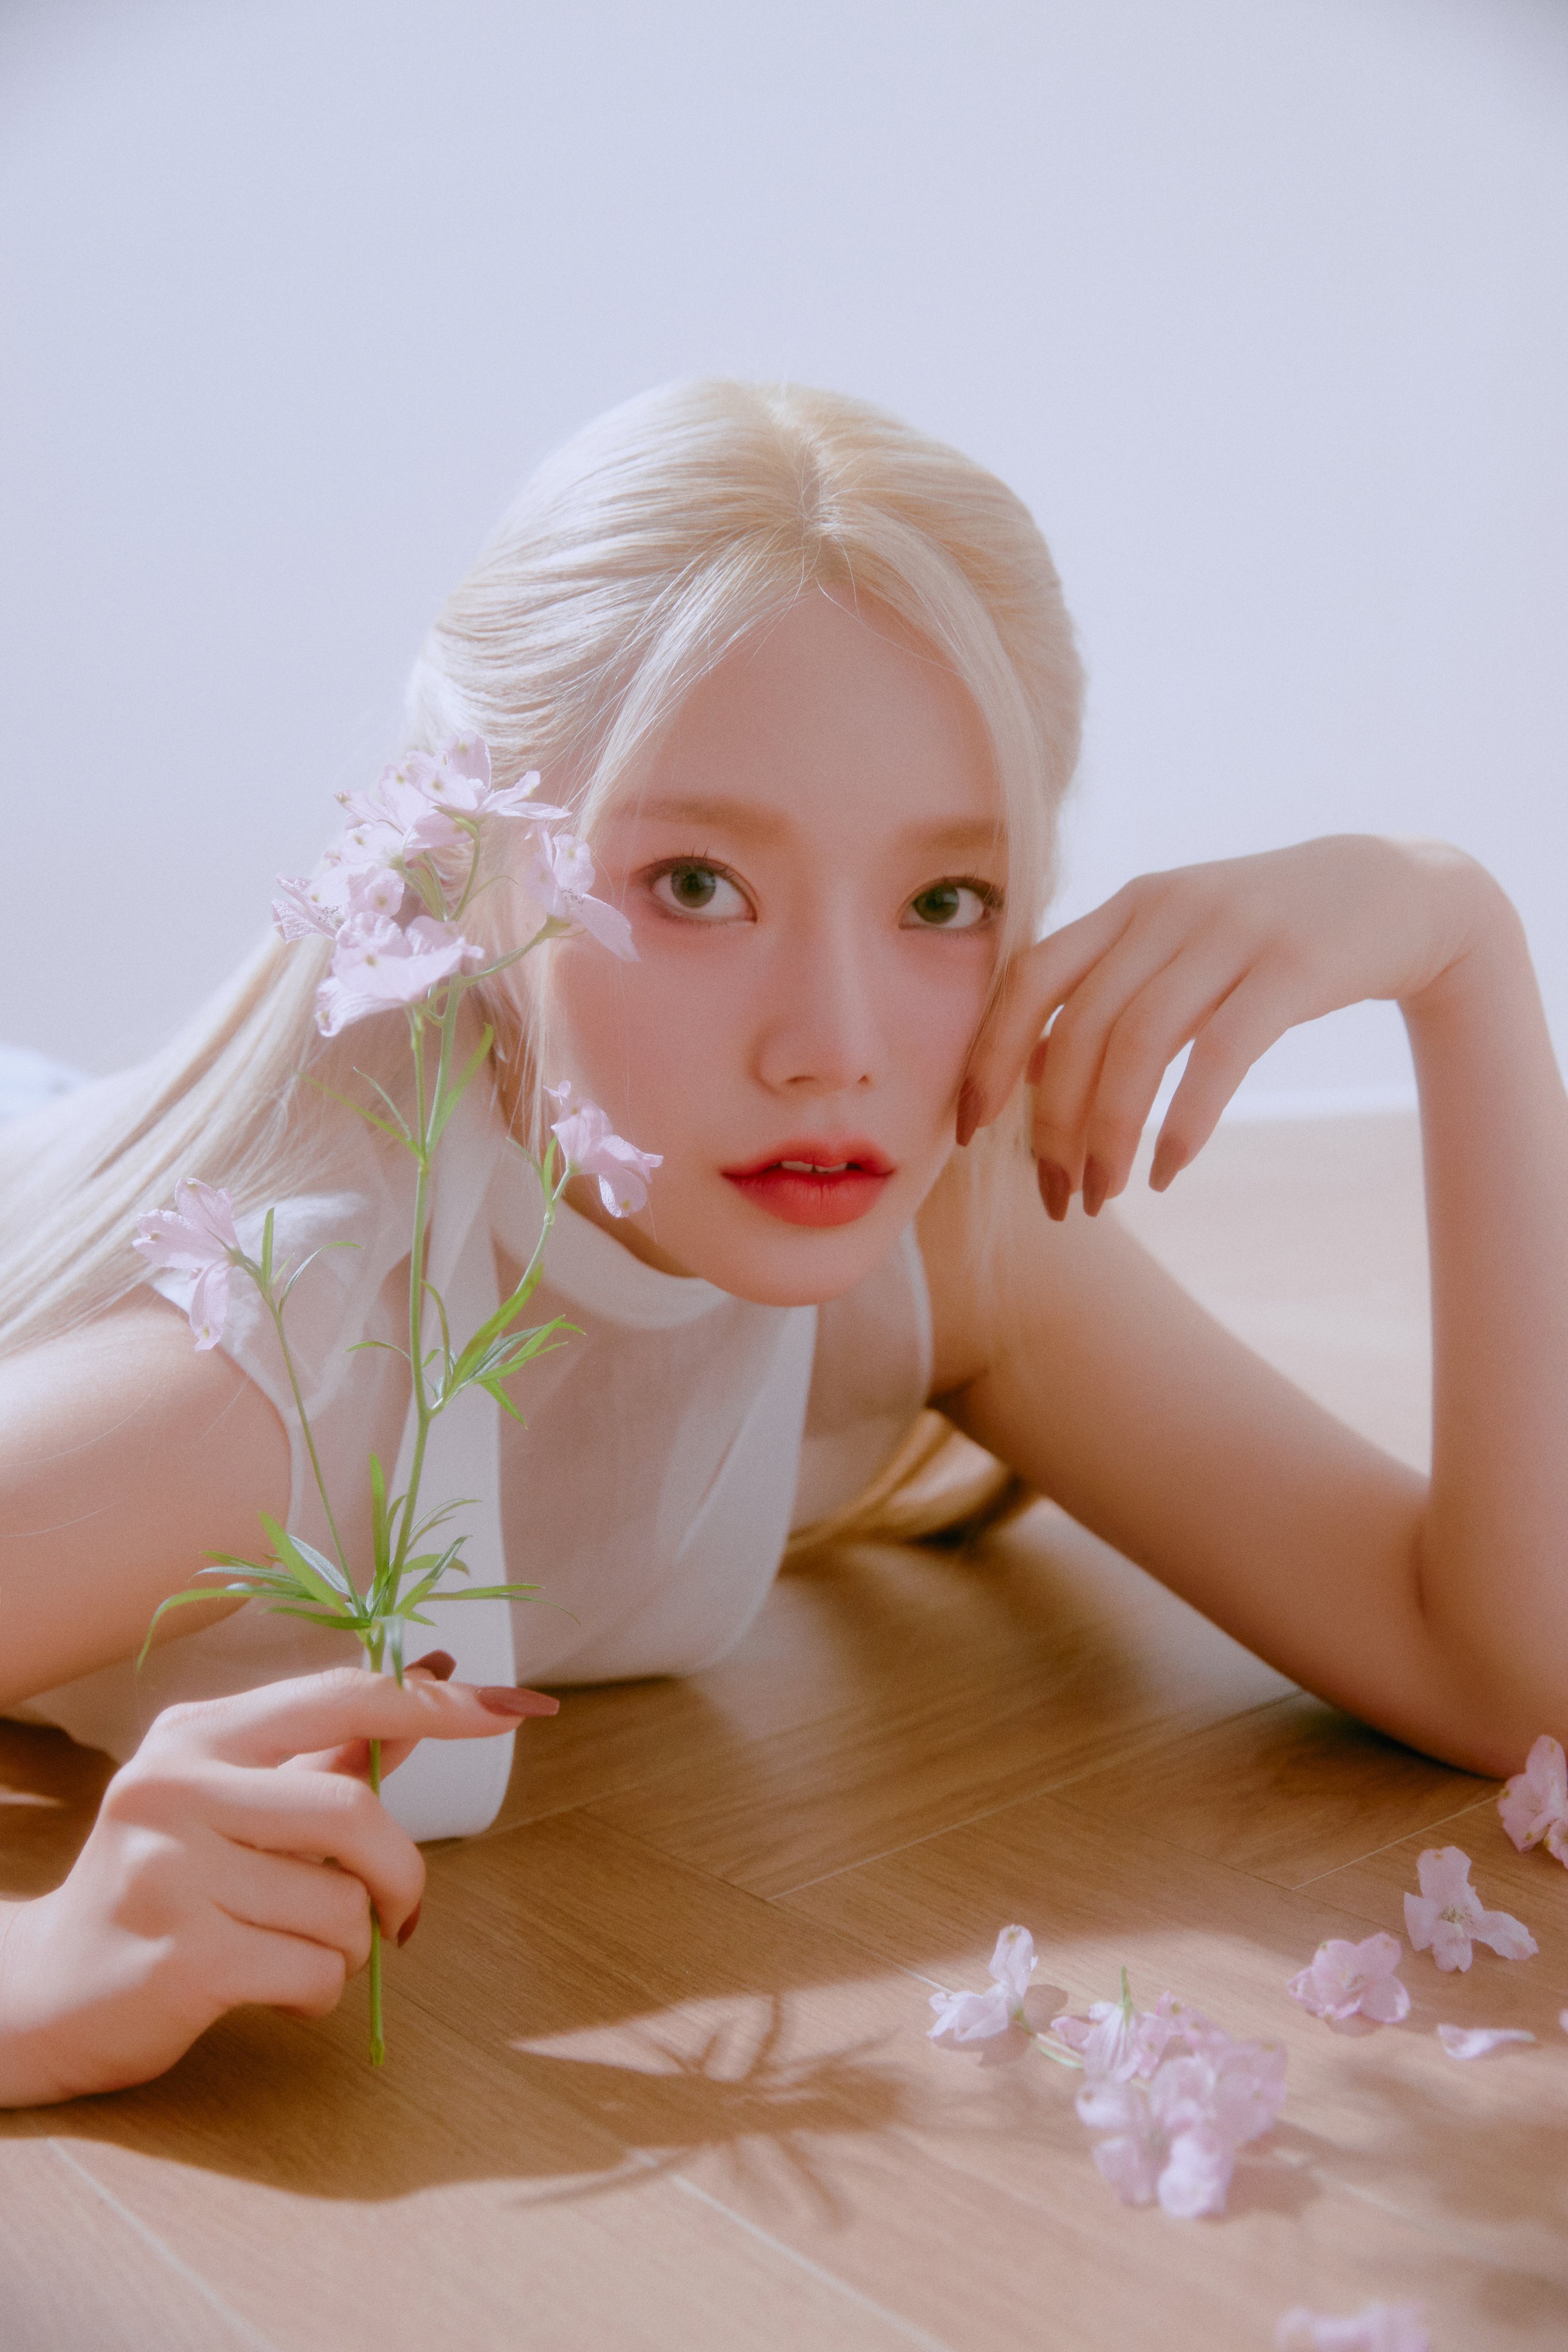 FIFTY FIFTY - 'The Beginning: Cupid' Concept Photos